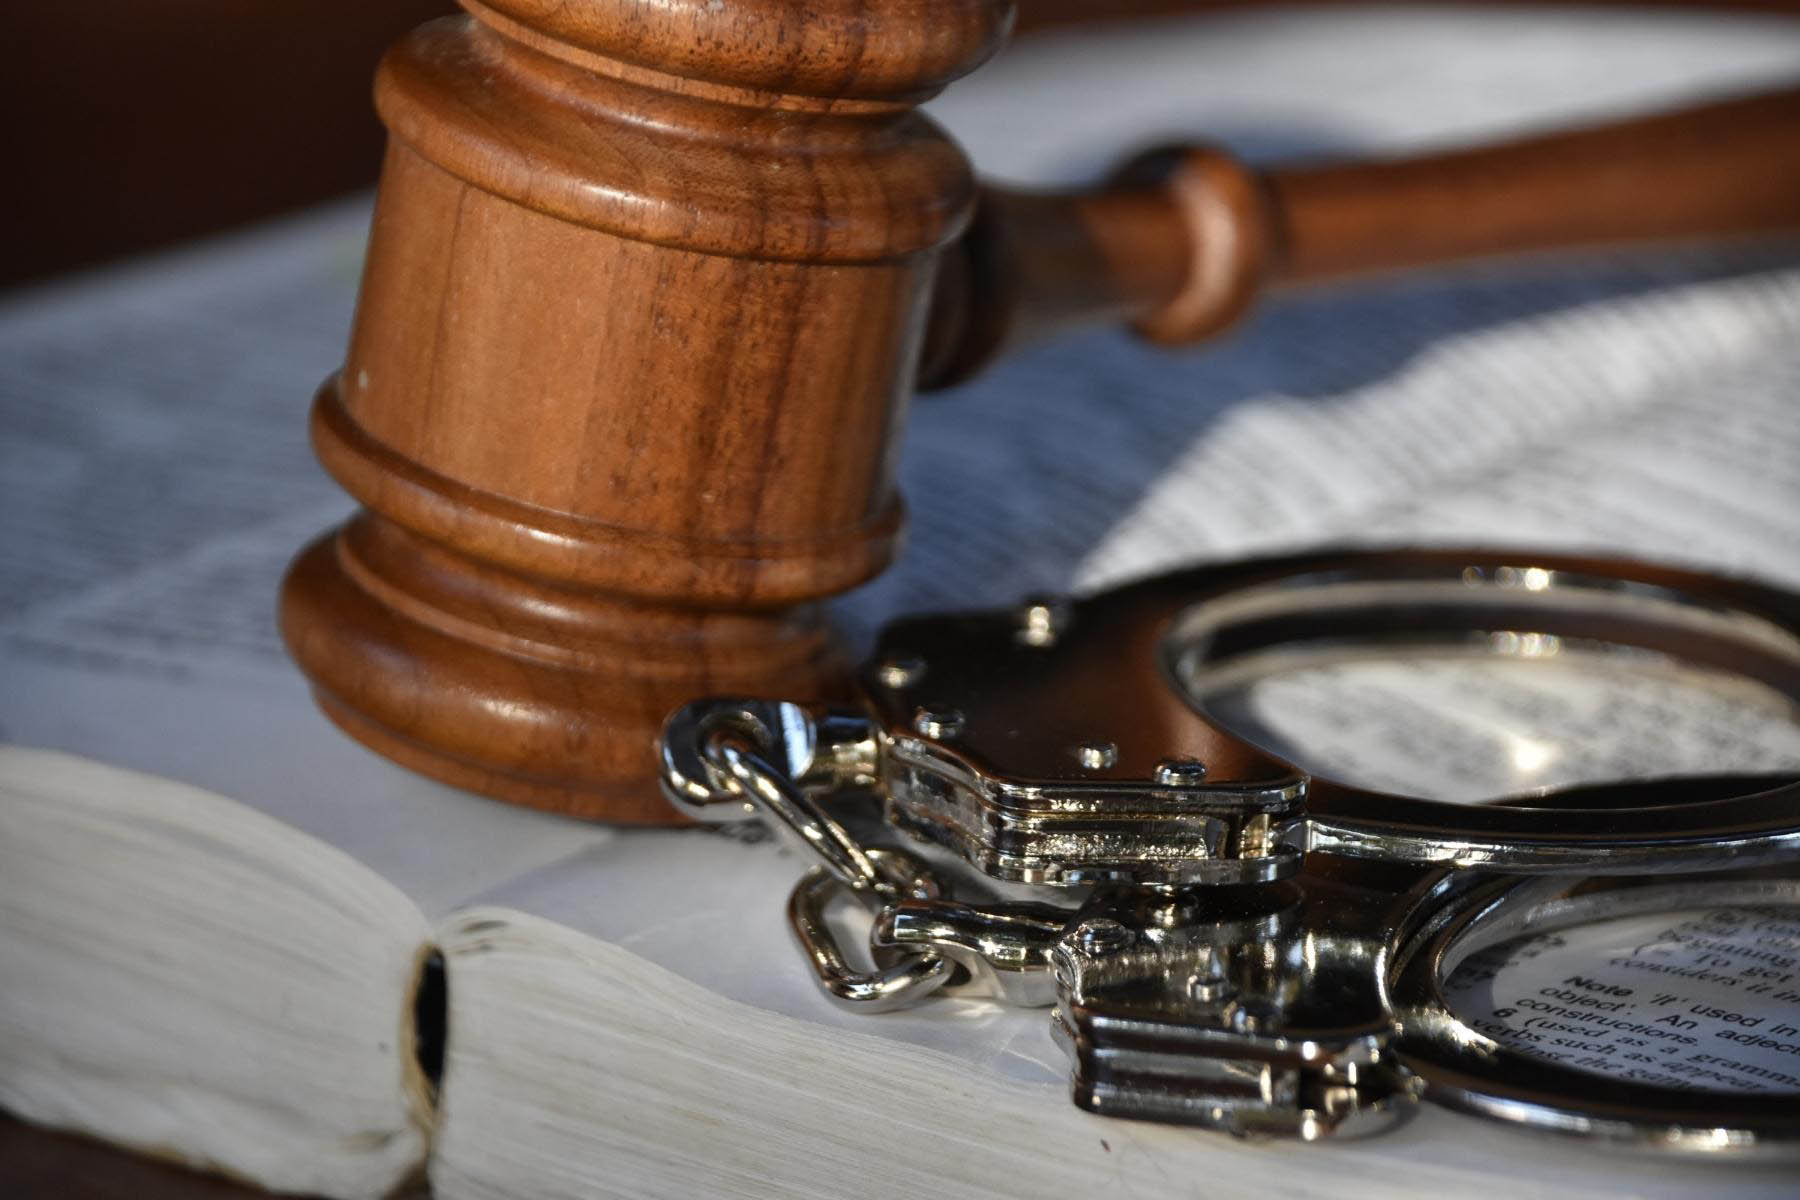 handcuffs and gavel